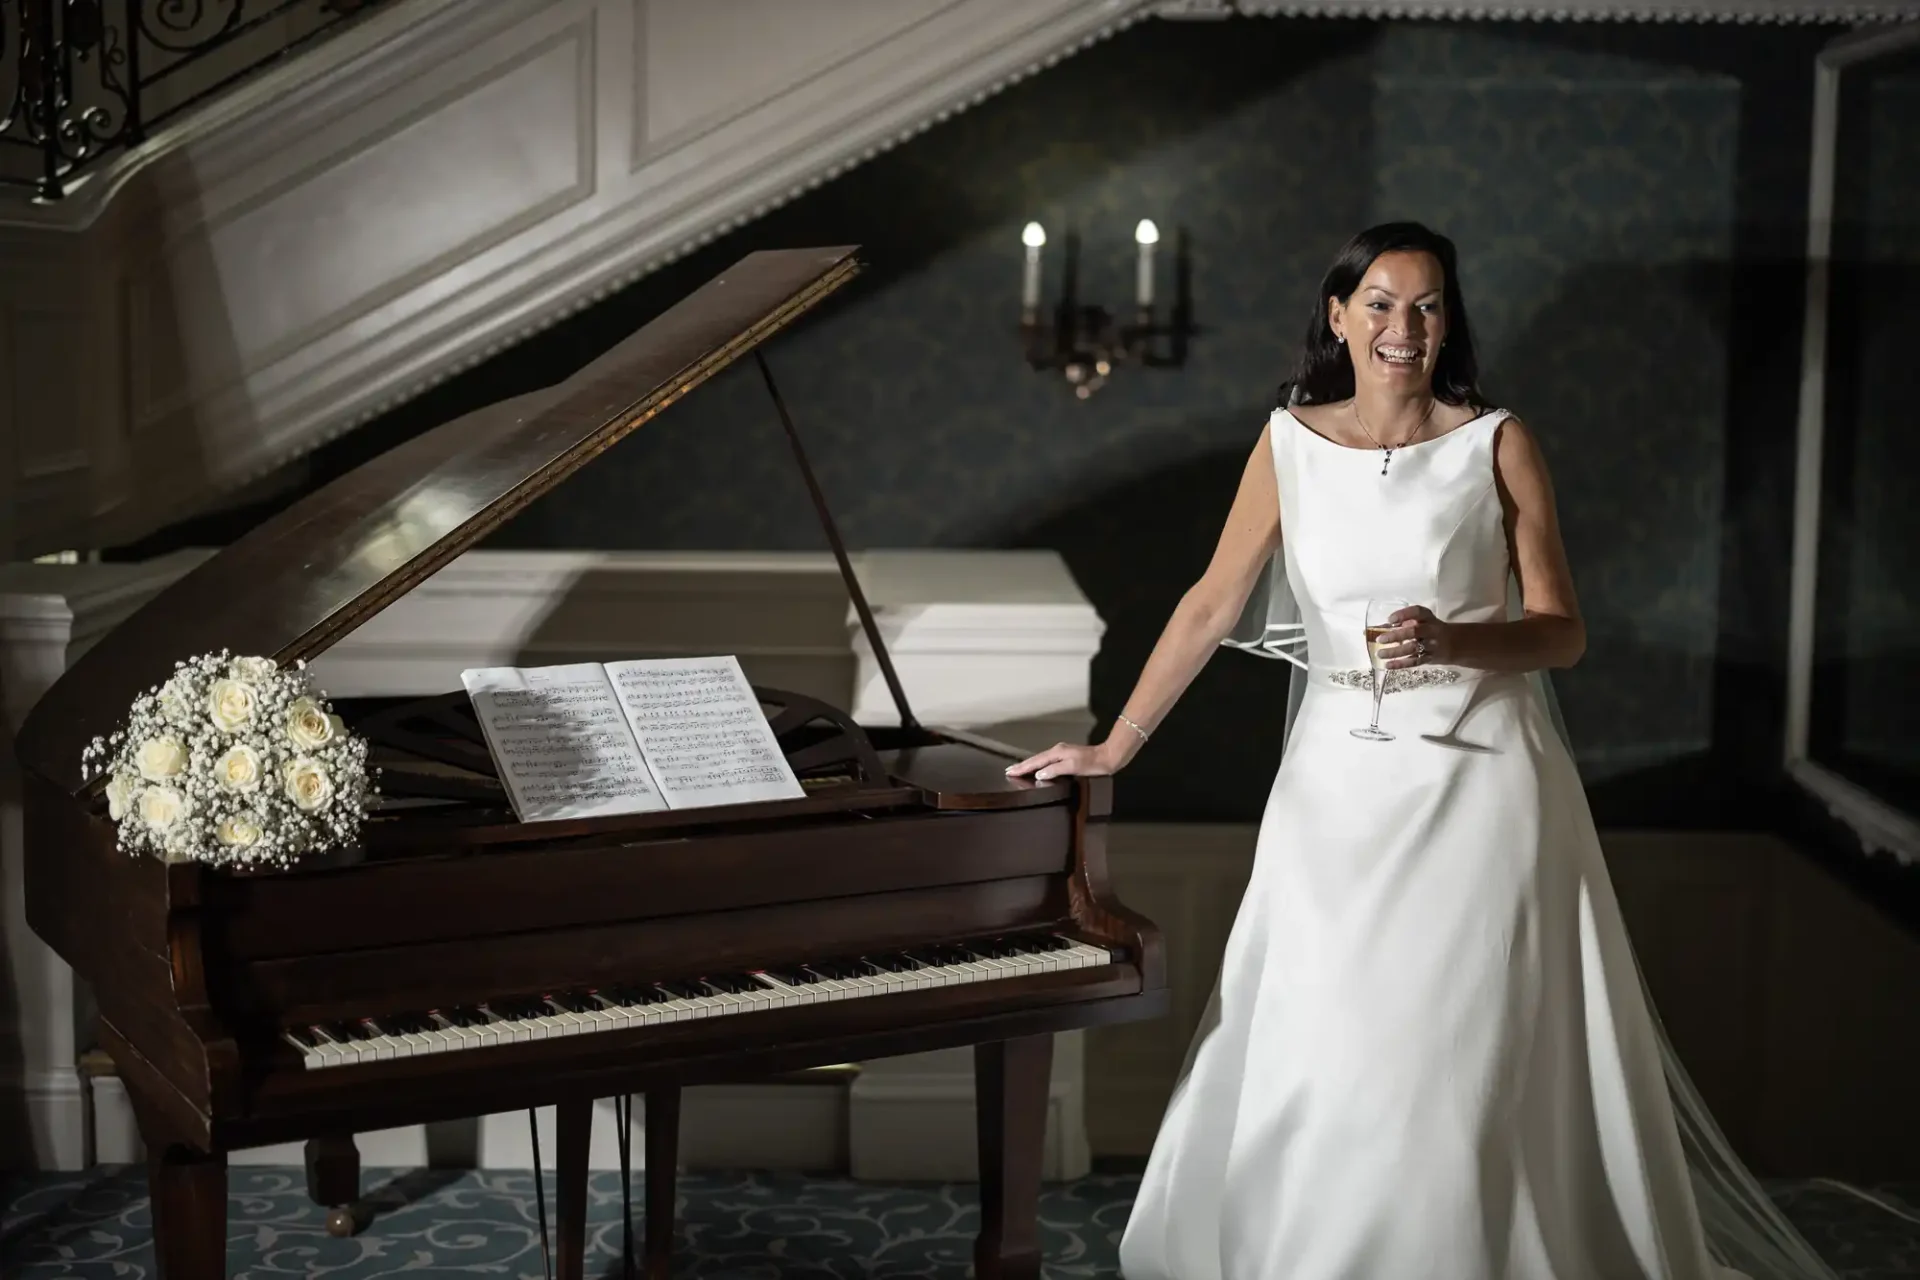 A smiling woman in a white wedding dress stands beside an open grand piano, holding a wine glass, in an elegant room.